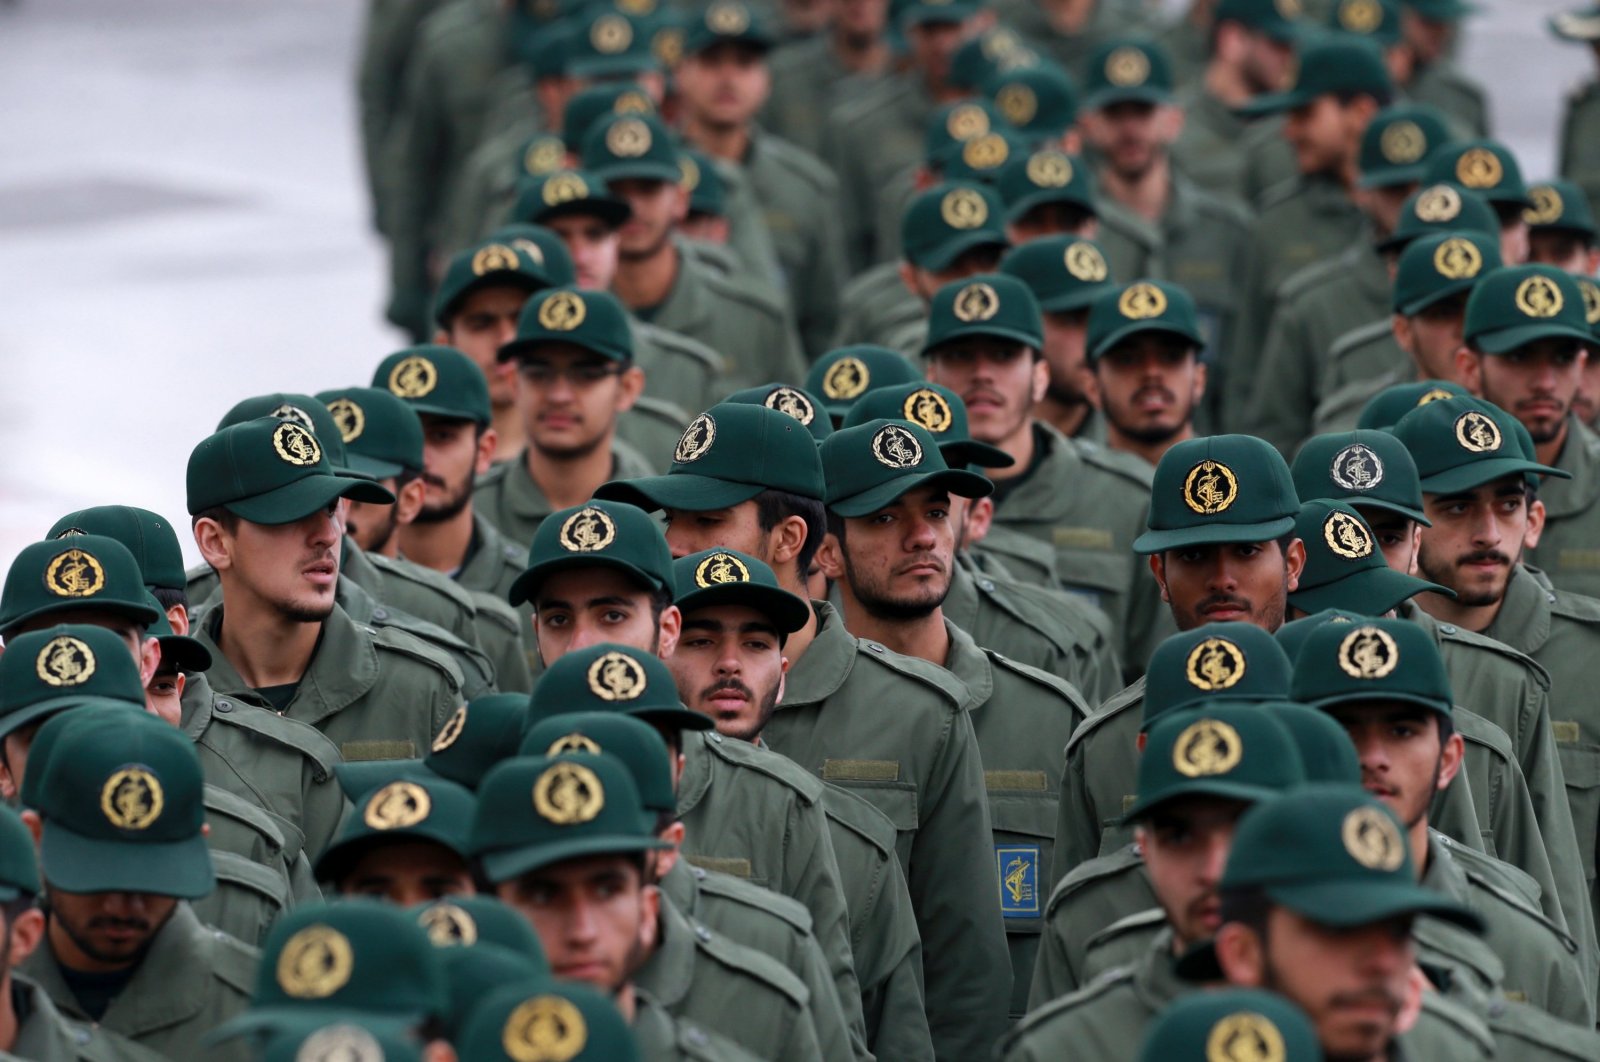 Iranian Revolutionary Guard members arrive for a ceremony celebrating the 40th anniversary of the Islamic Revolution, at the Azadi, or Freedom, Square, in Tehran, Iran, Feb, 11, 2019. (AP File Photo)